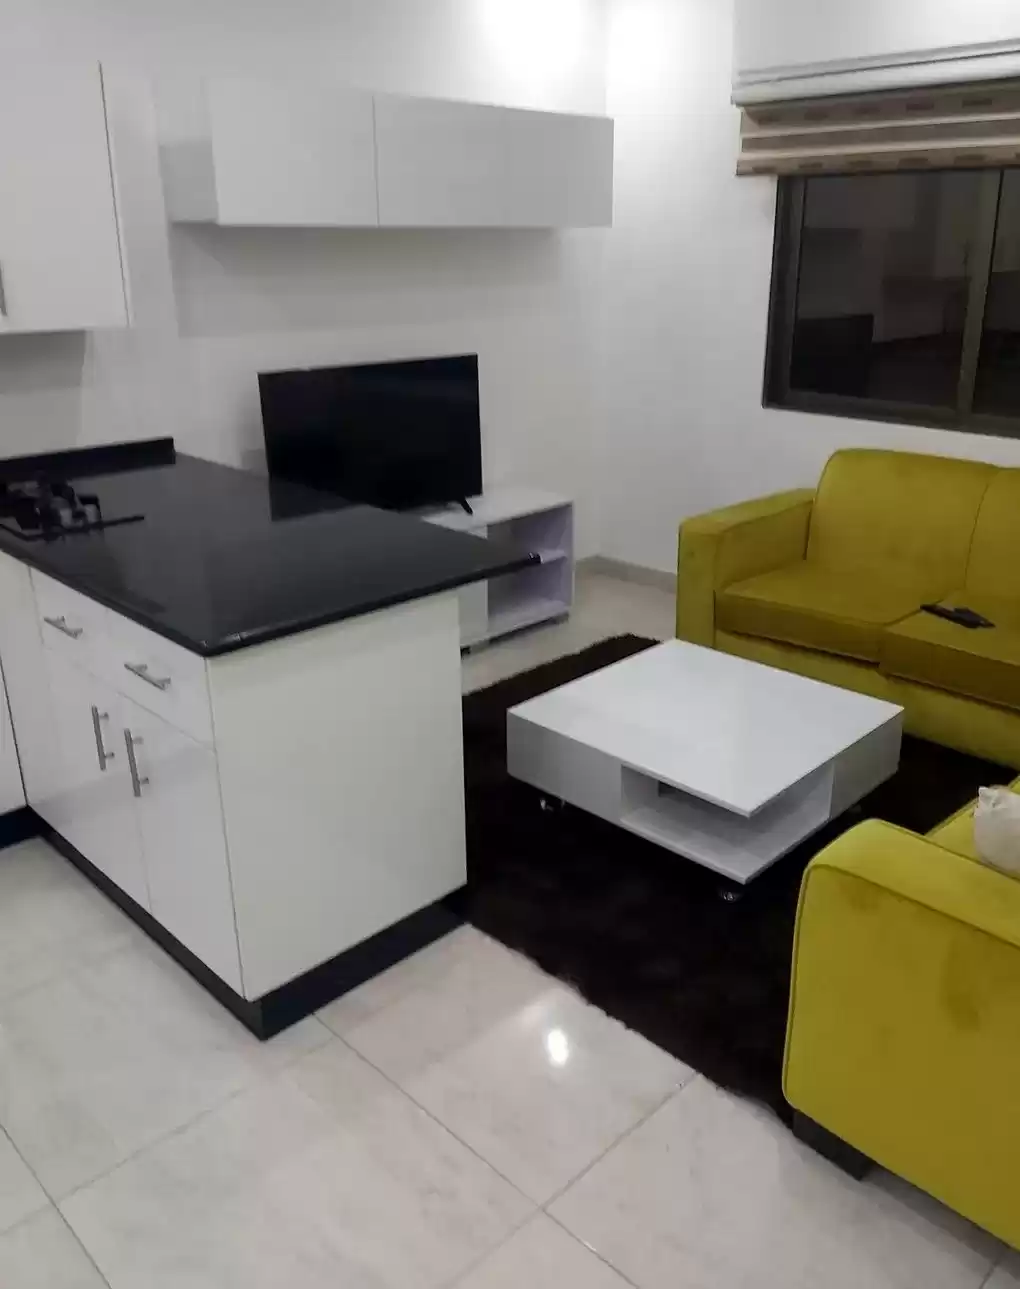 Residential Ready Property Studio F/F Apartment  for rent in Amman #25930 - 1  image 